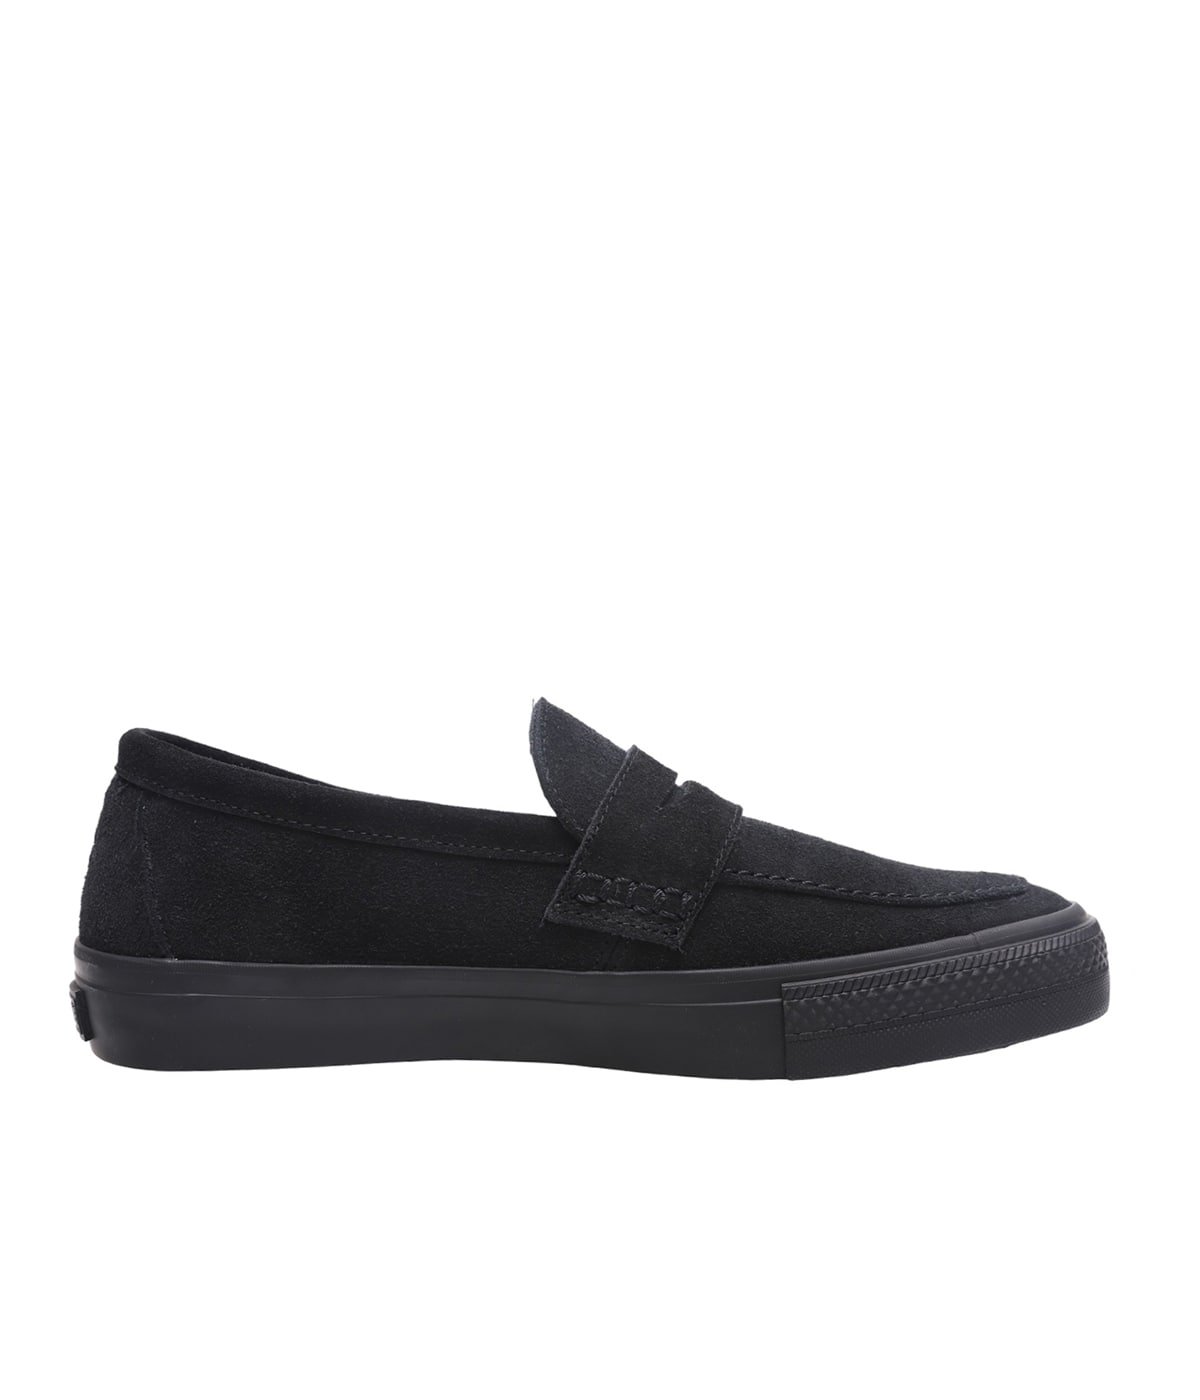 convers loafer sk 27cm us8.5